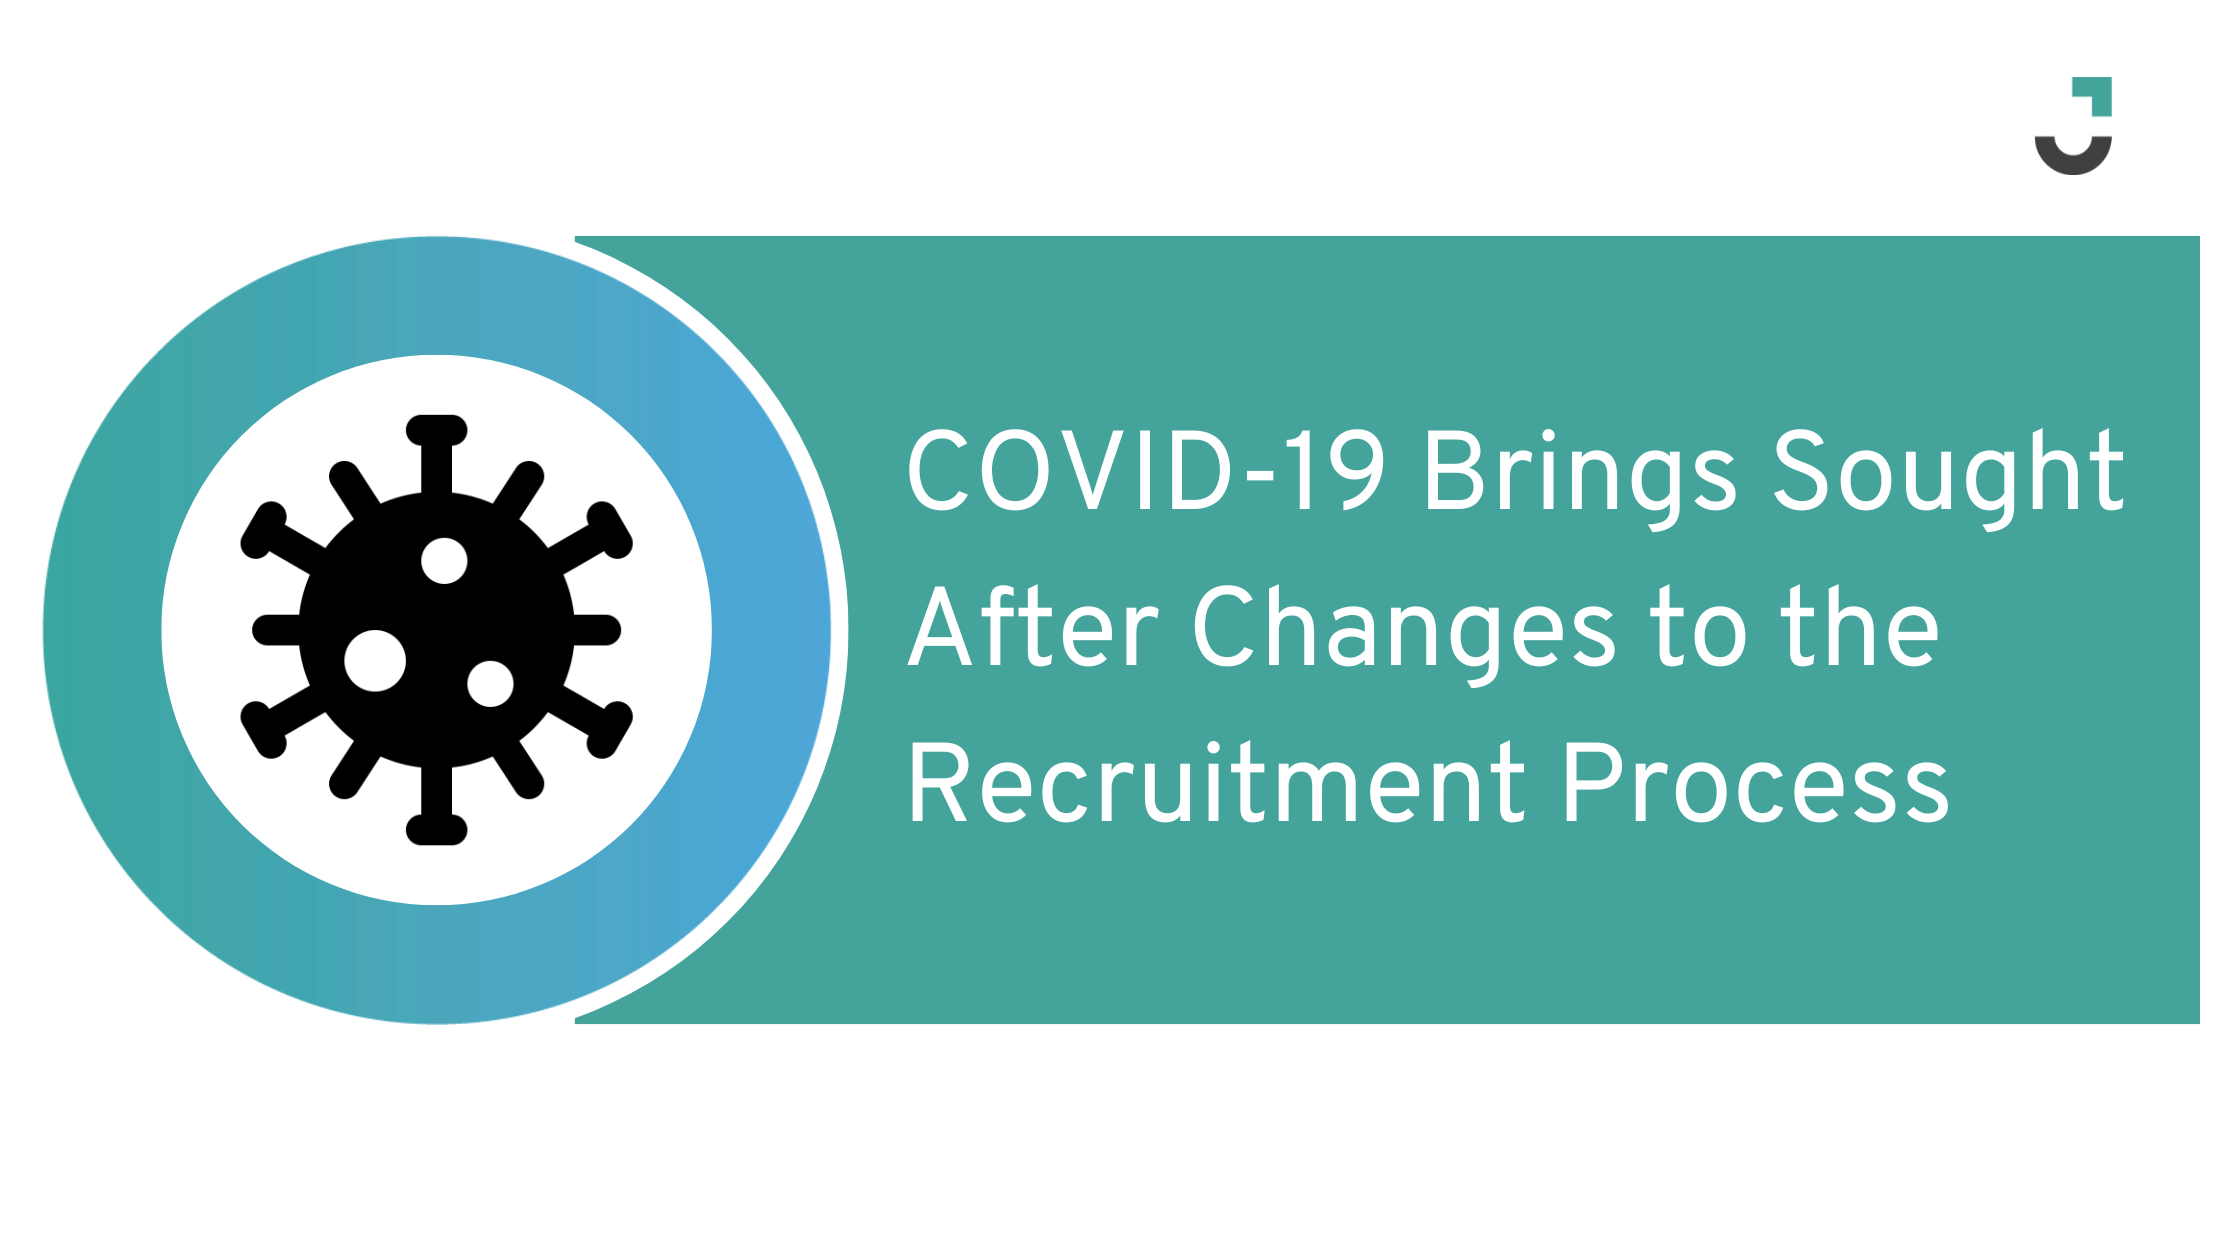 COVID-19 Brings Sought After Changes to the Recruitment Process